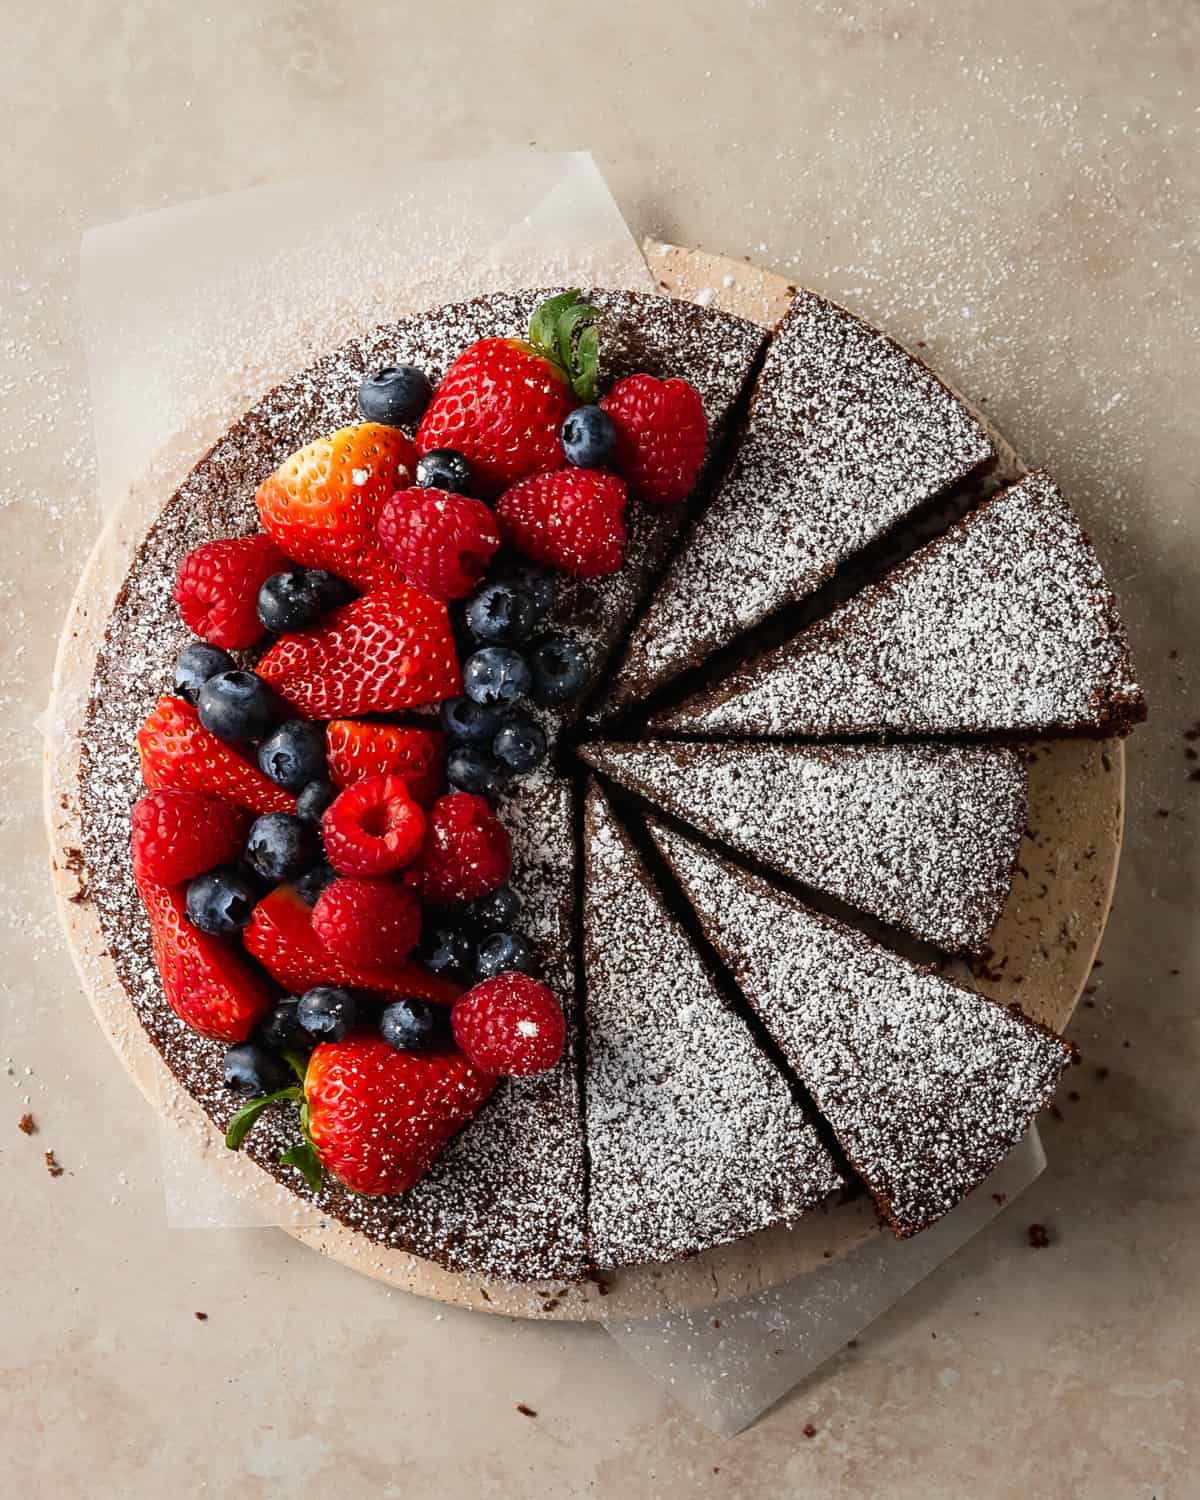 Chocolate olive oil cake is a deeply moist and tender chocolate cake made with rich and earthy olive oil. Top this simple olive oil chocolate cake with berries and fresh whipped cream for the perfect easy to make dessert. 